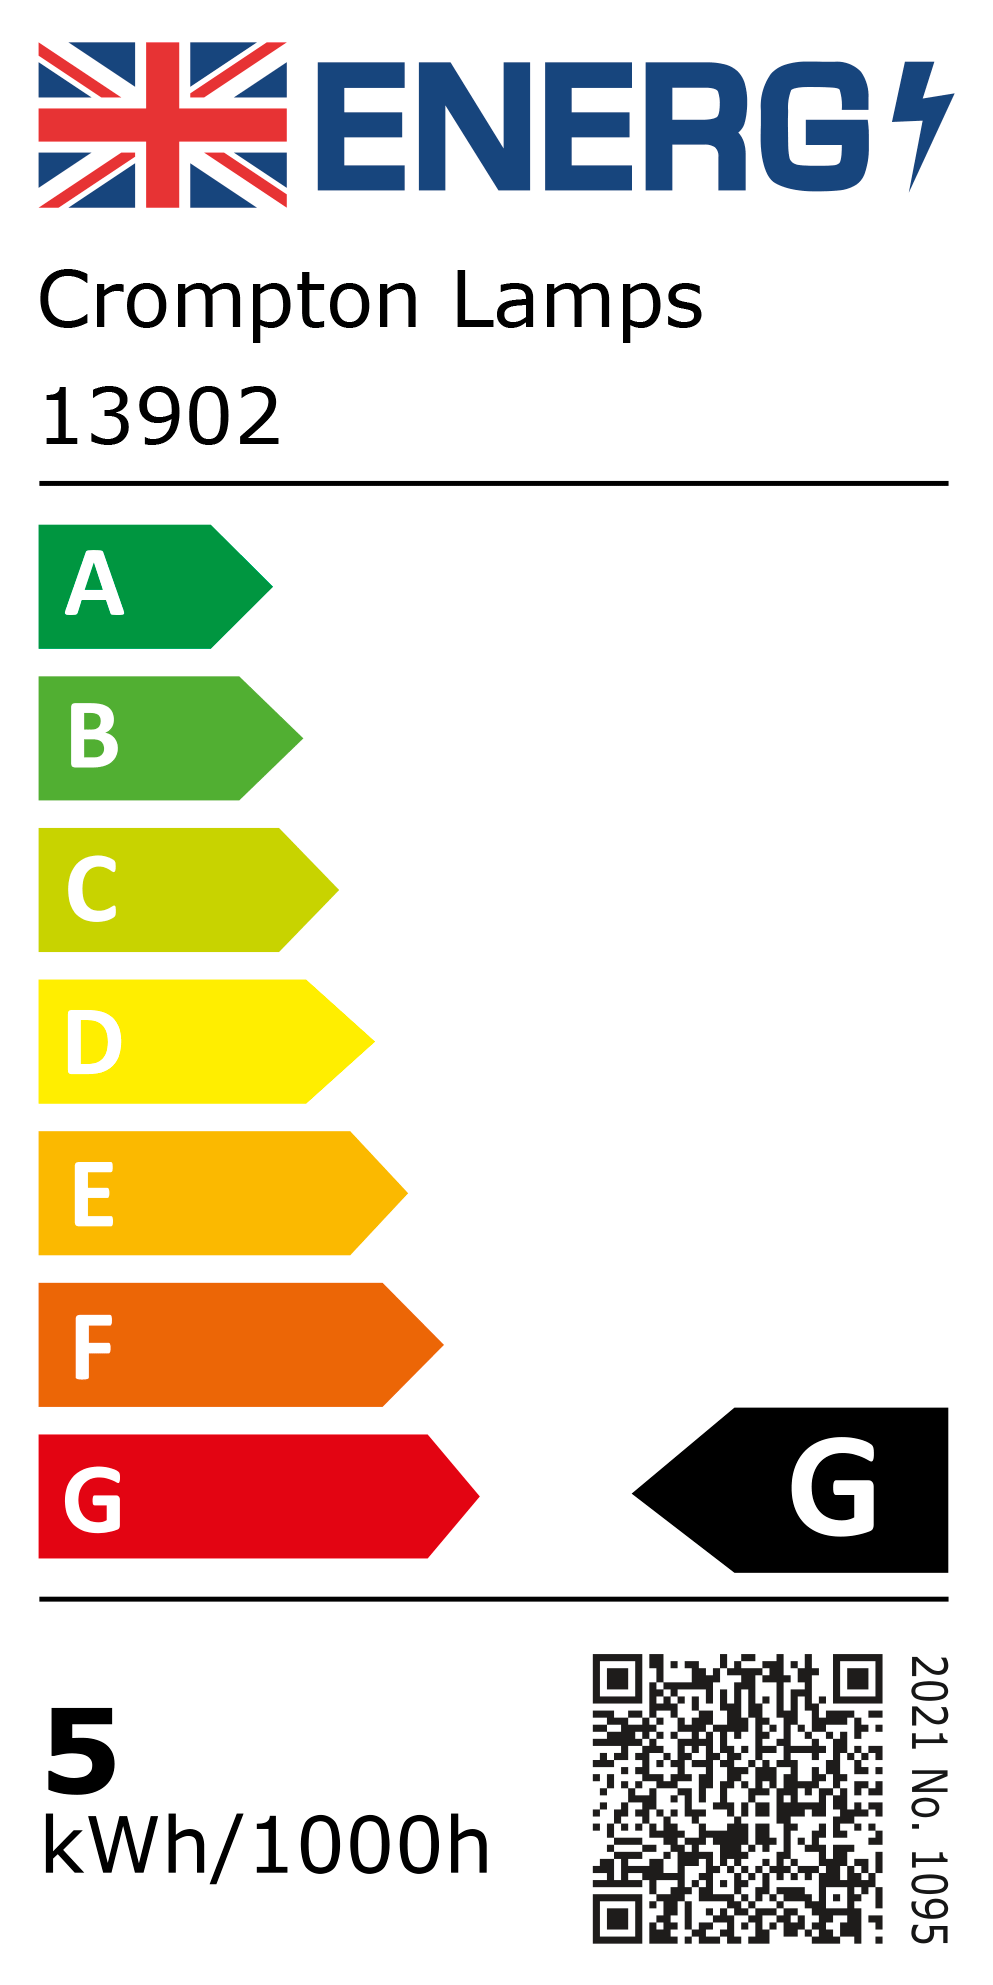 New 2021 Energy Rating Label: Stock Code 13902